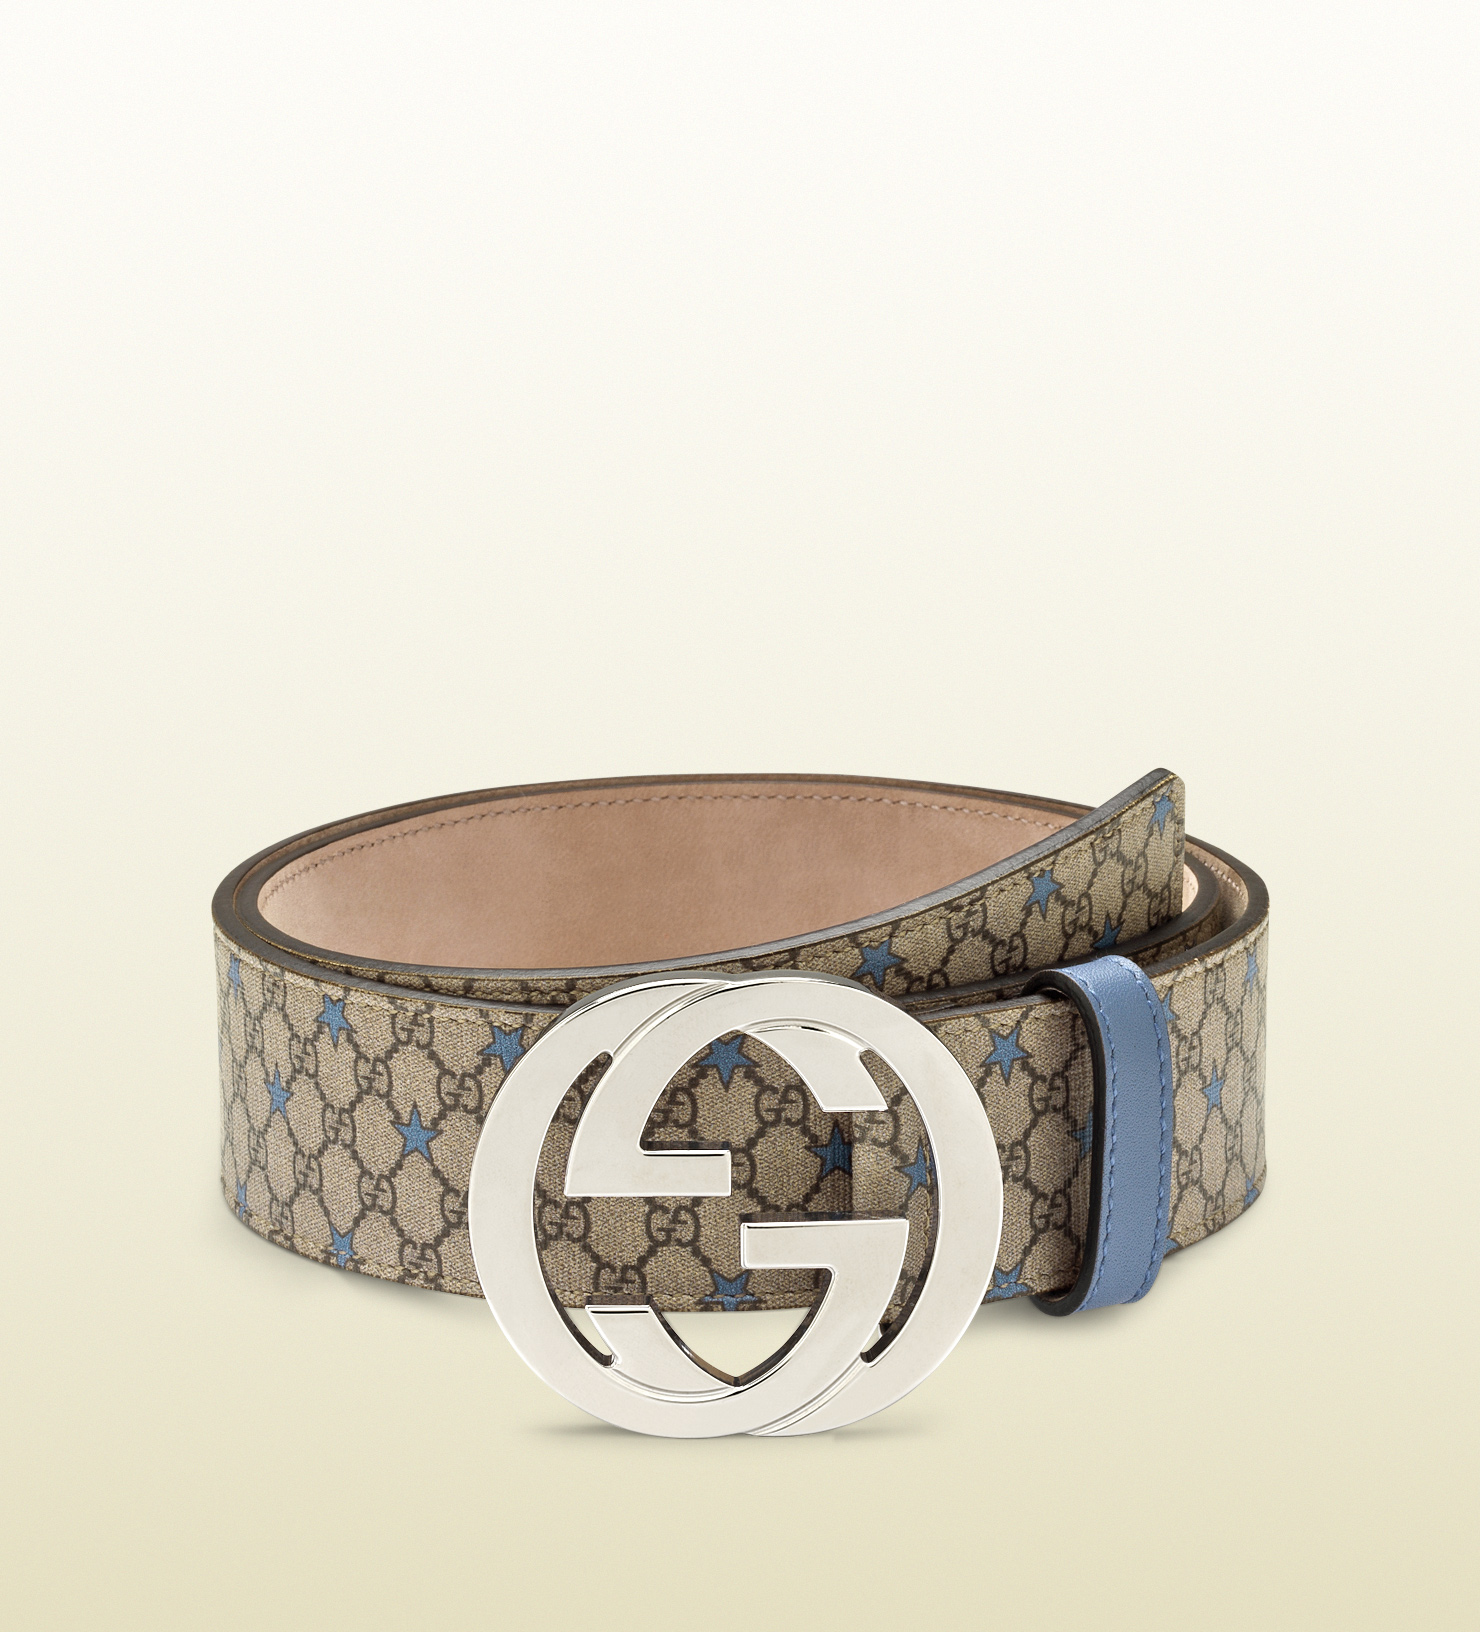 Lyst - Gucci Gg Supreme Canvas Belt with Interlocking G Buckle in Natural for Men